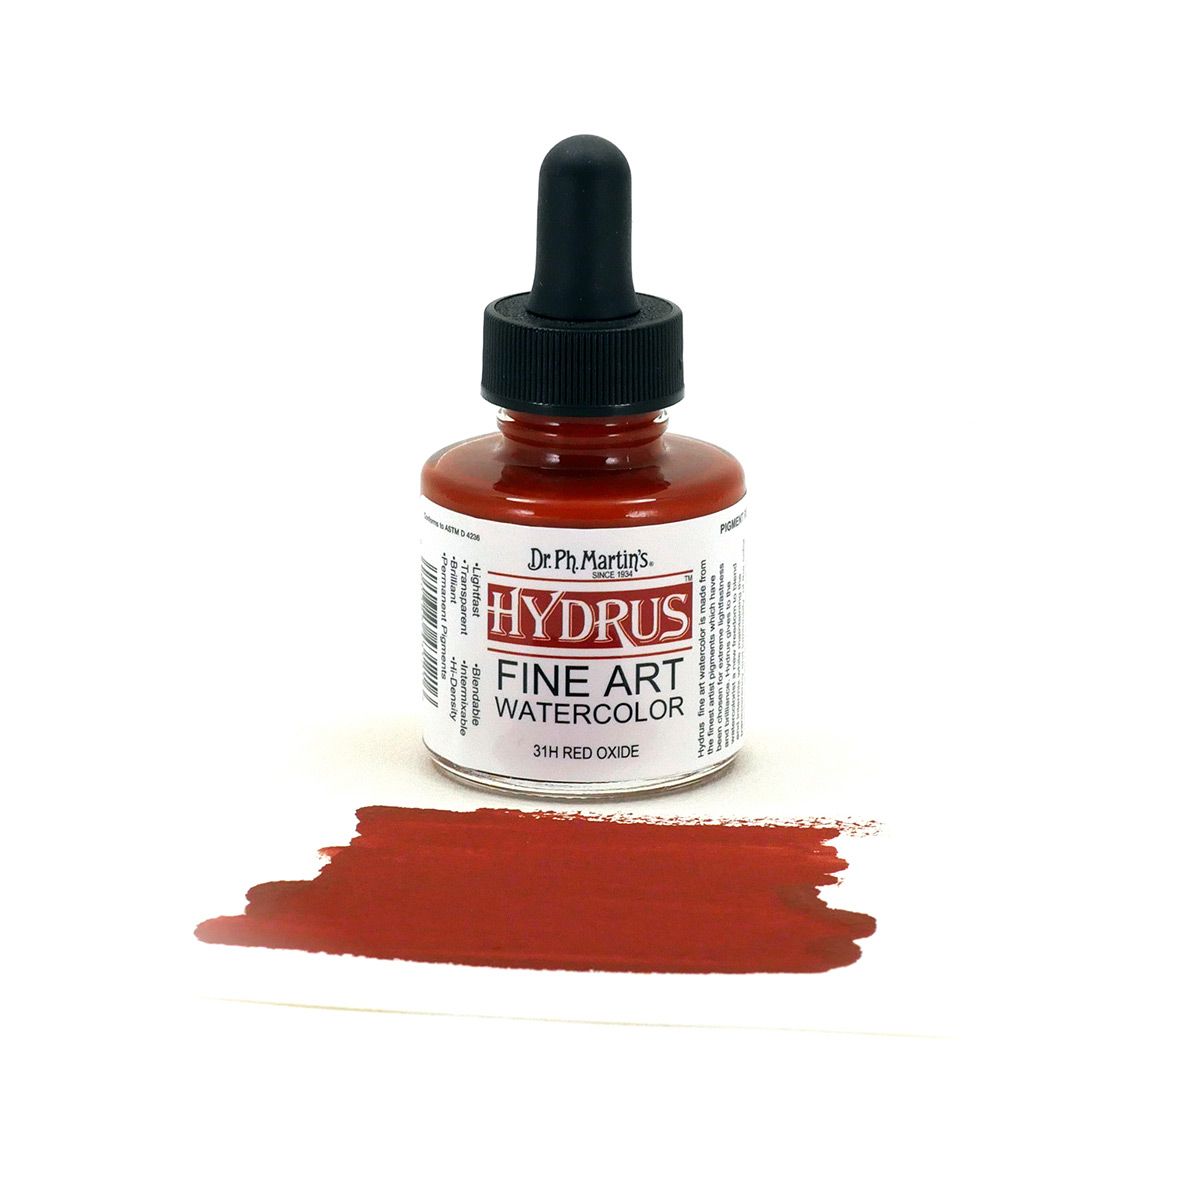 Hydrus Watercolor 1 oz Bottle - Red Oxide